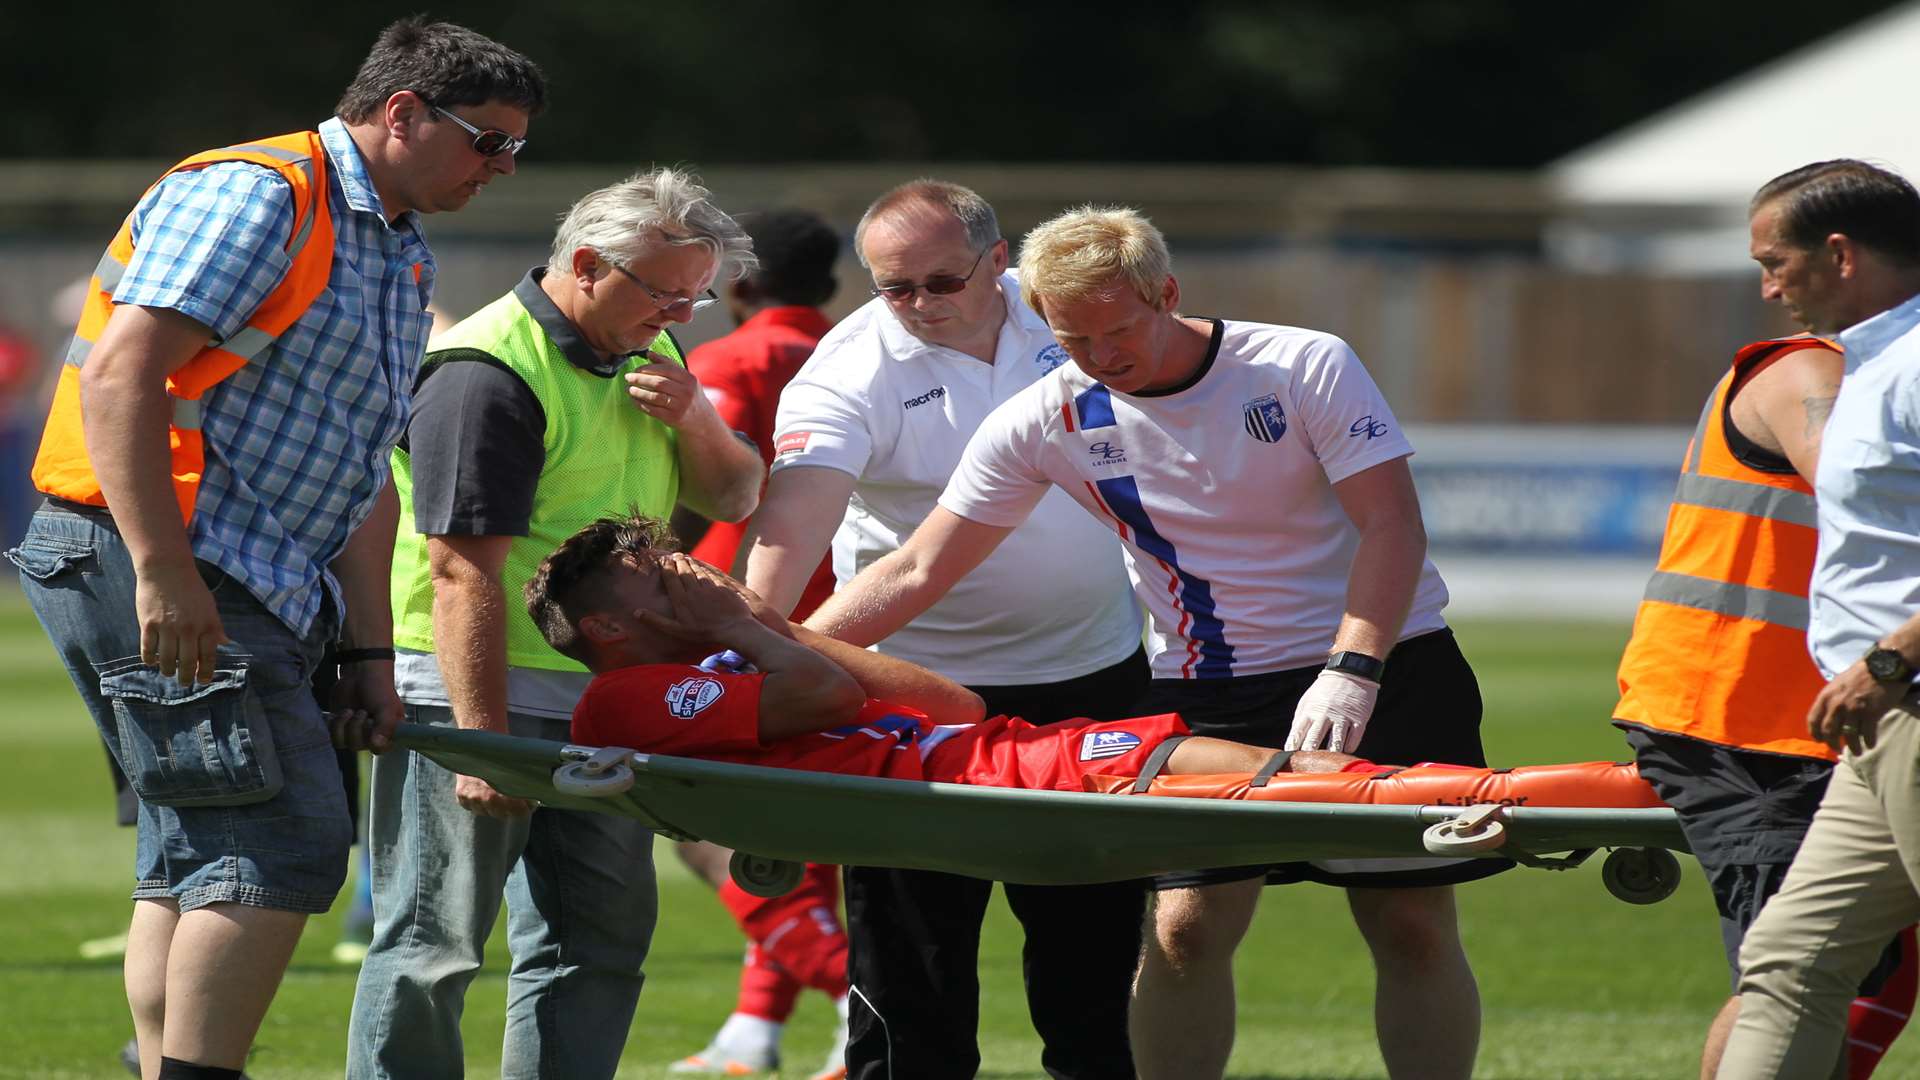 Josh Hare is stretchered off at Tonbridge on Saturday. Picture: John Westhrop